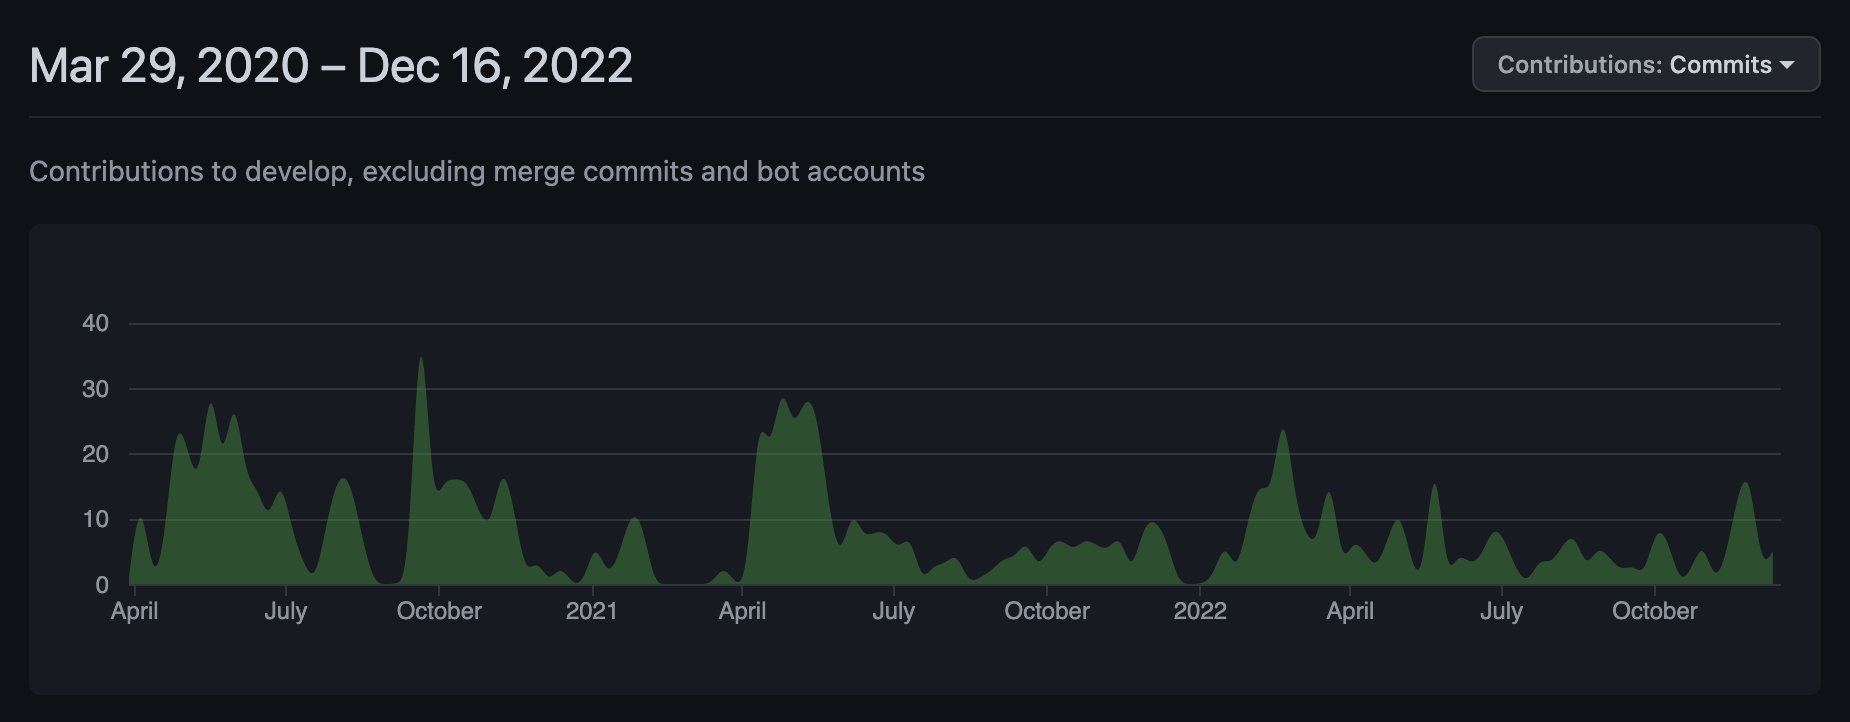 GitHub contributor commit history for Nebari. It shows a steady flow of commits from March 2020 till November 2022. The activity in the first half of this period is bursty, while the second half is lower but more consistent.